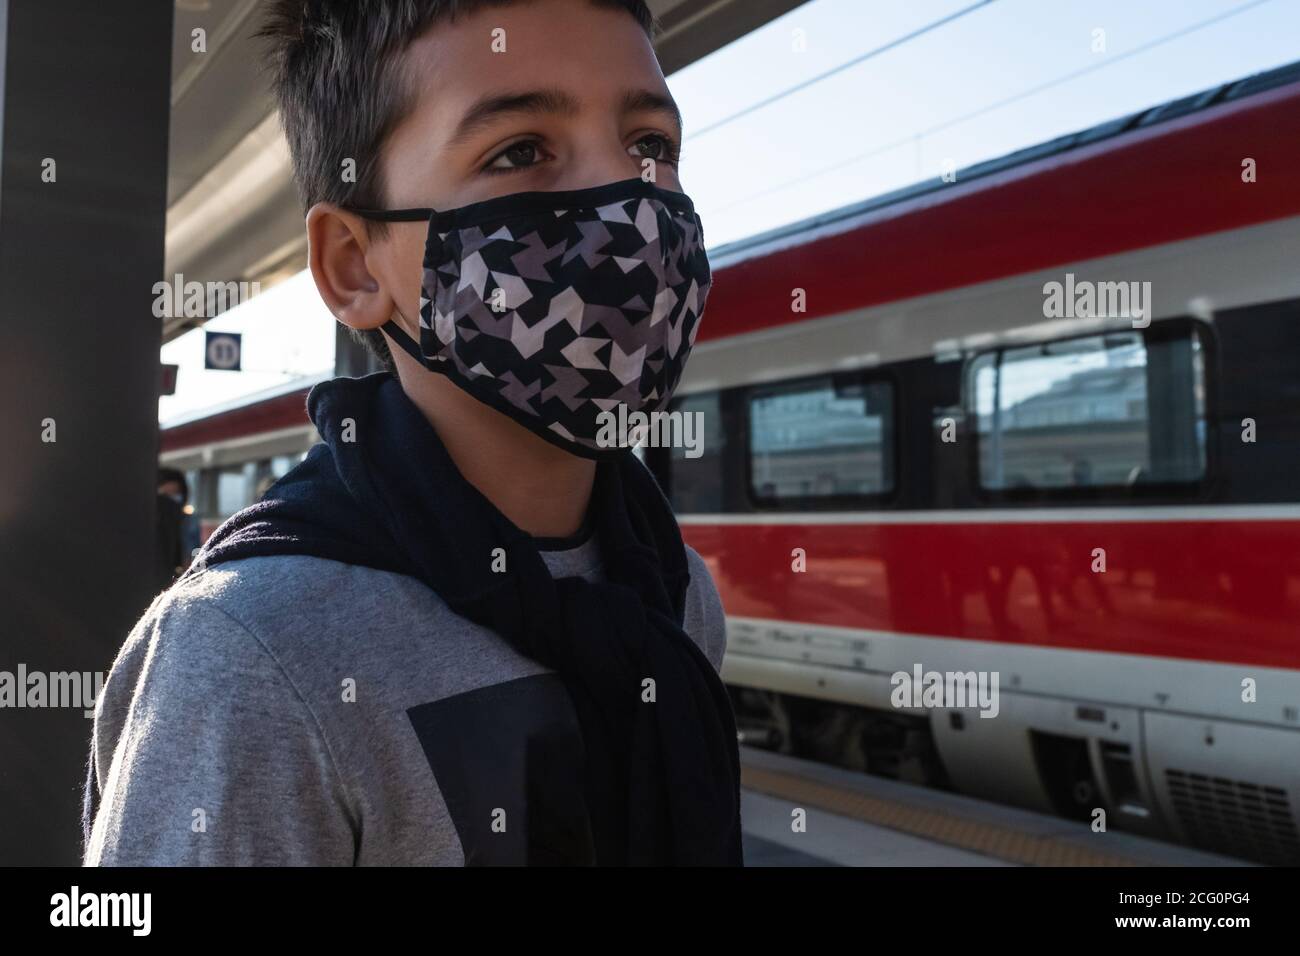 Close-up of a male caucasian child wearing a face mask as protection for coronavirus infection. He is waiting standing at railroad station. Stock Photo